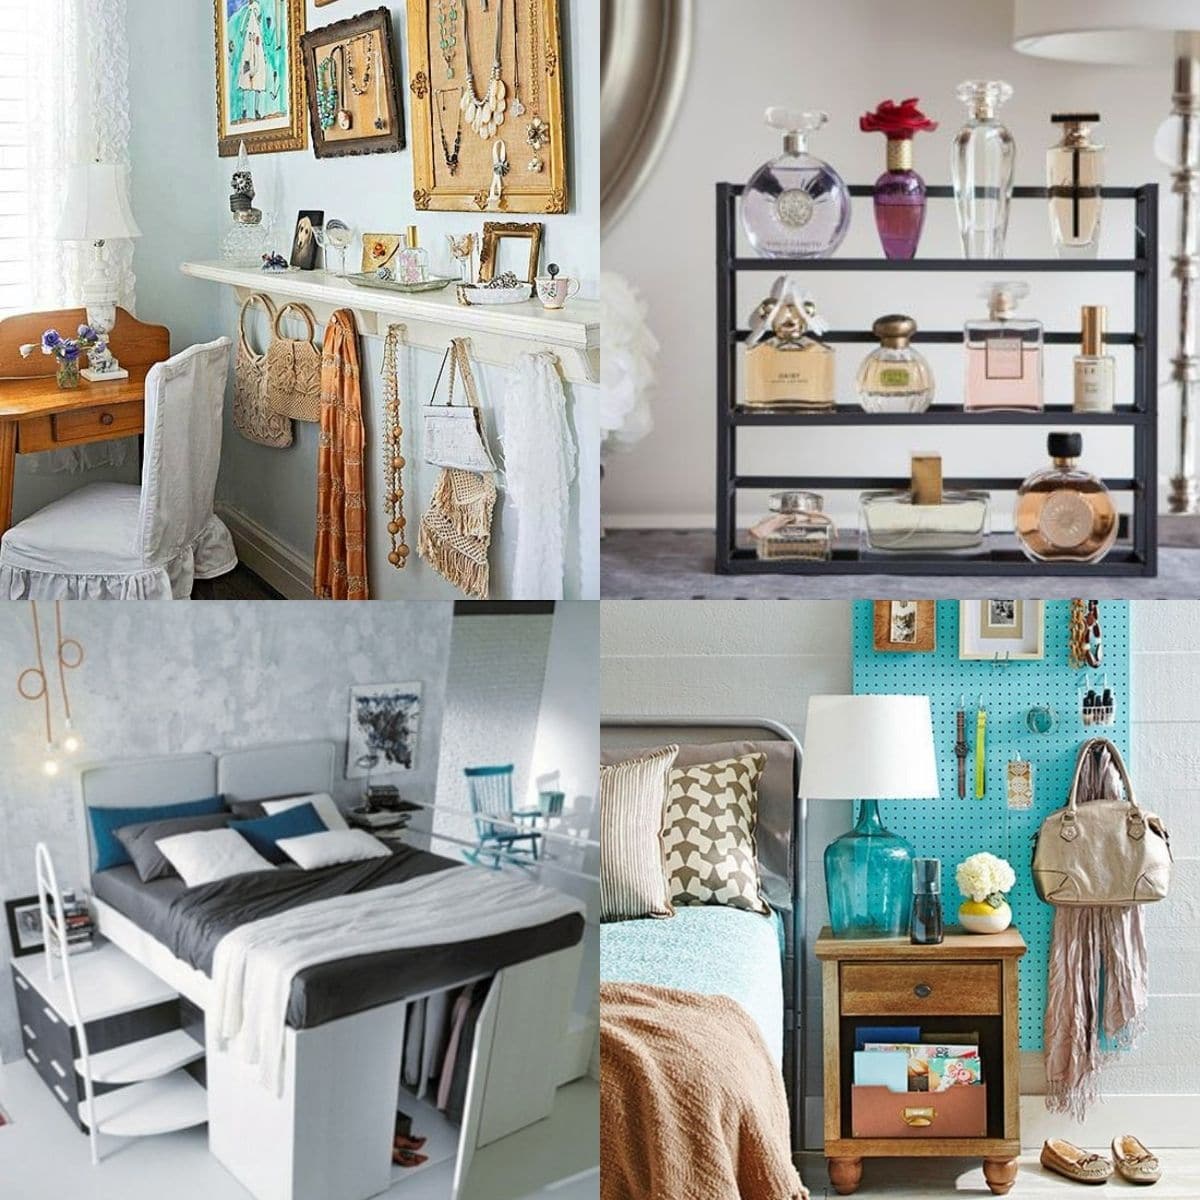 Increase storage in your small rooms with the fun hacks.

Keep your room both organized and stylish. 😉

#Storage #StorageIDeas #StorageSpace #SmallRooms #SmallRoomStorage #SmallRoomStorageIDeas

 LocalInfoForYou.com/140013/small-r…